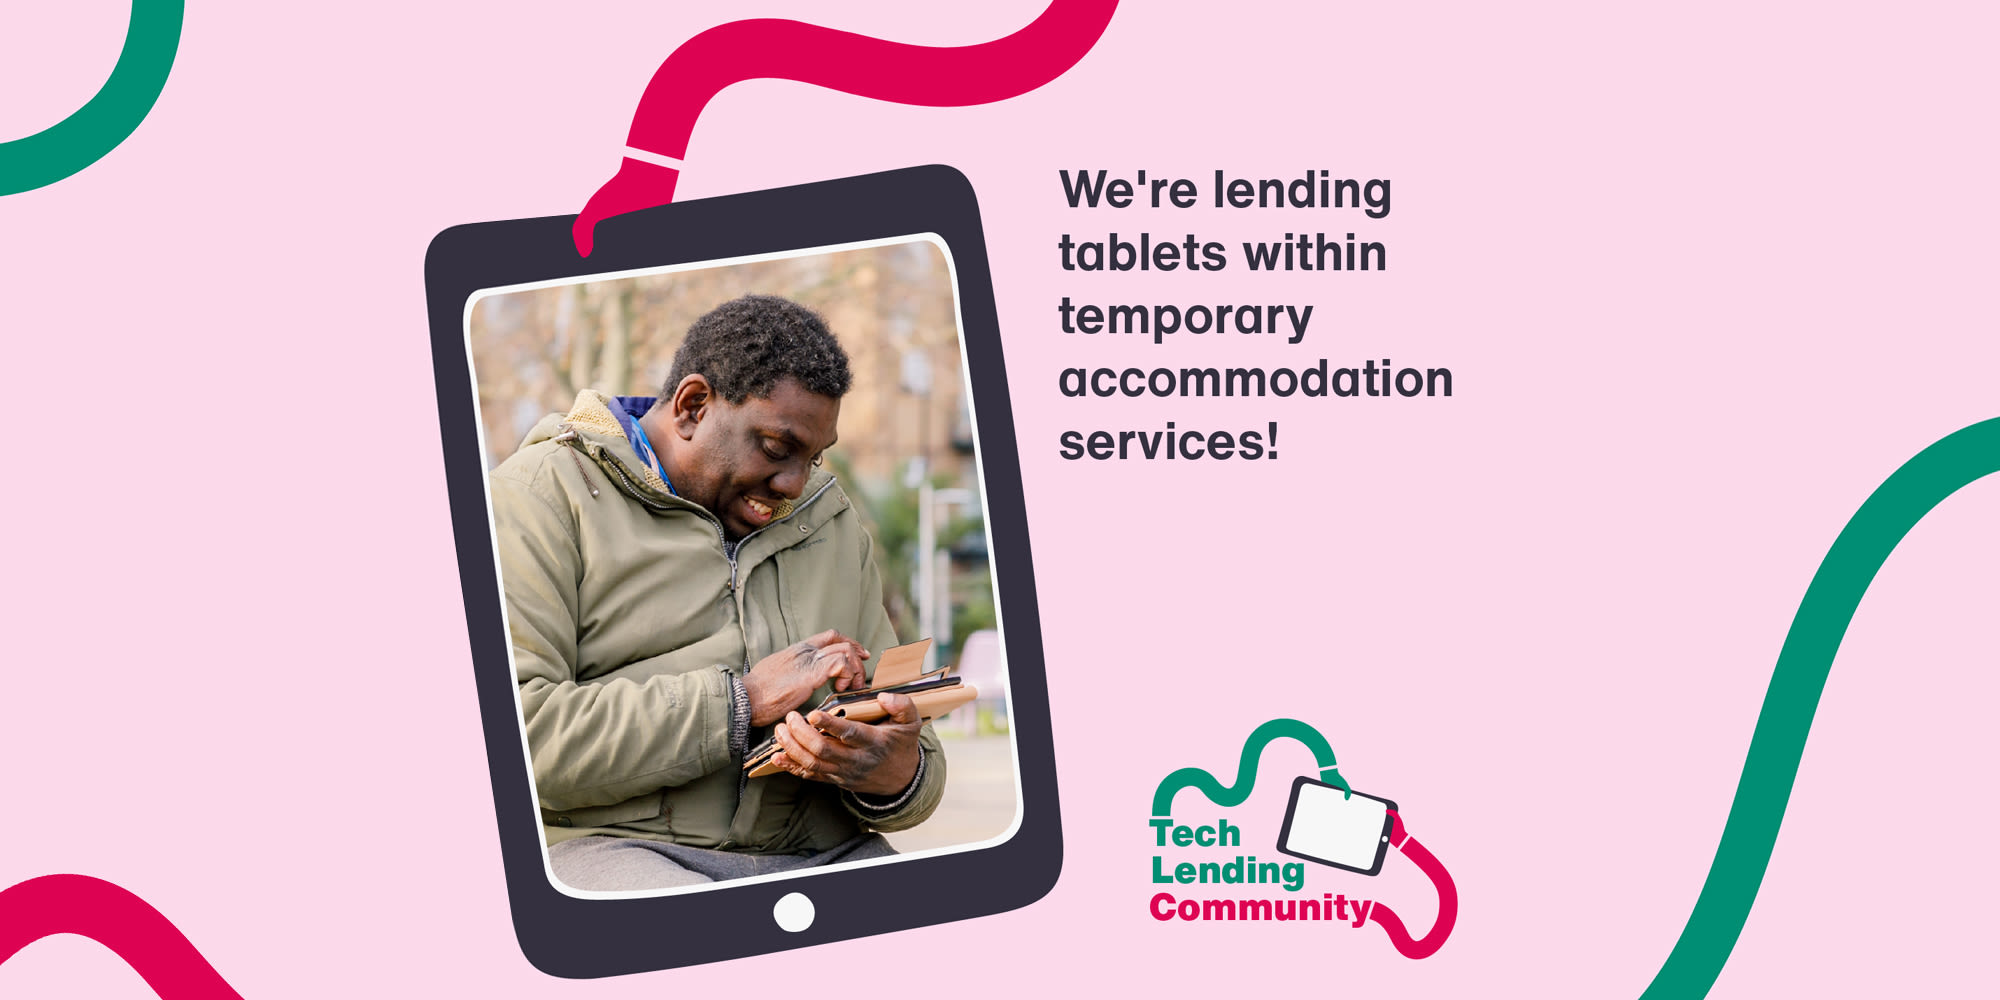 Image of a man using a tablet, with text: "We're lending tablets within temporary accommodation services! Tech Lending Community"